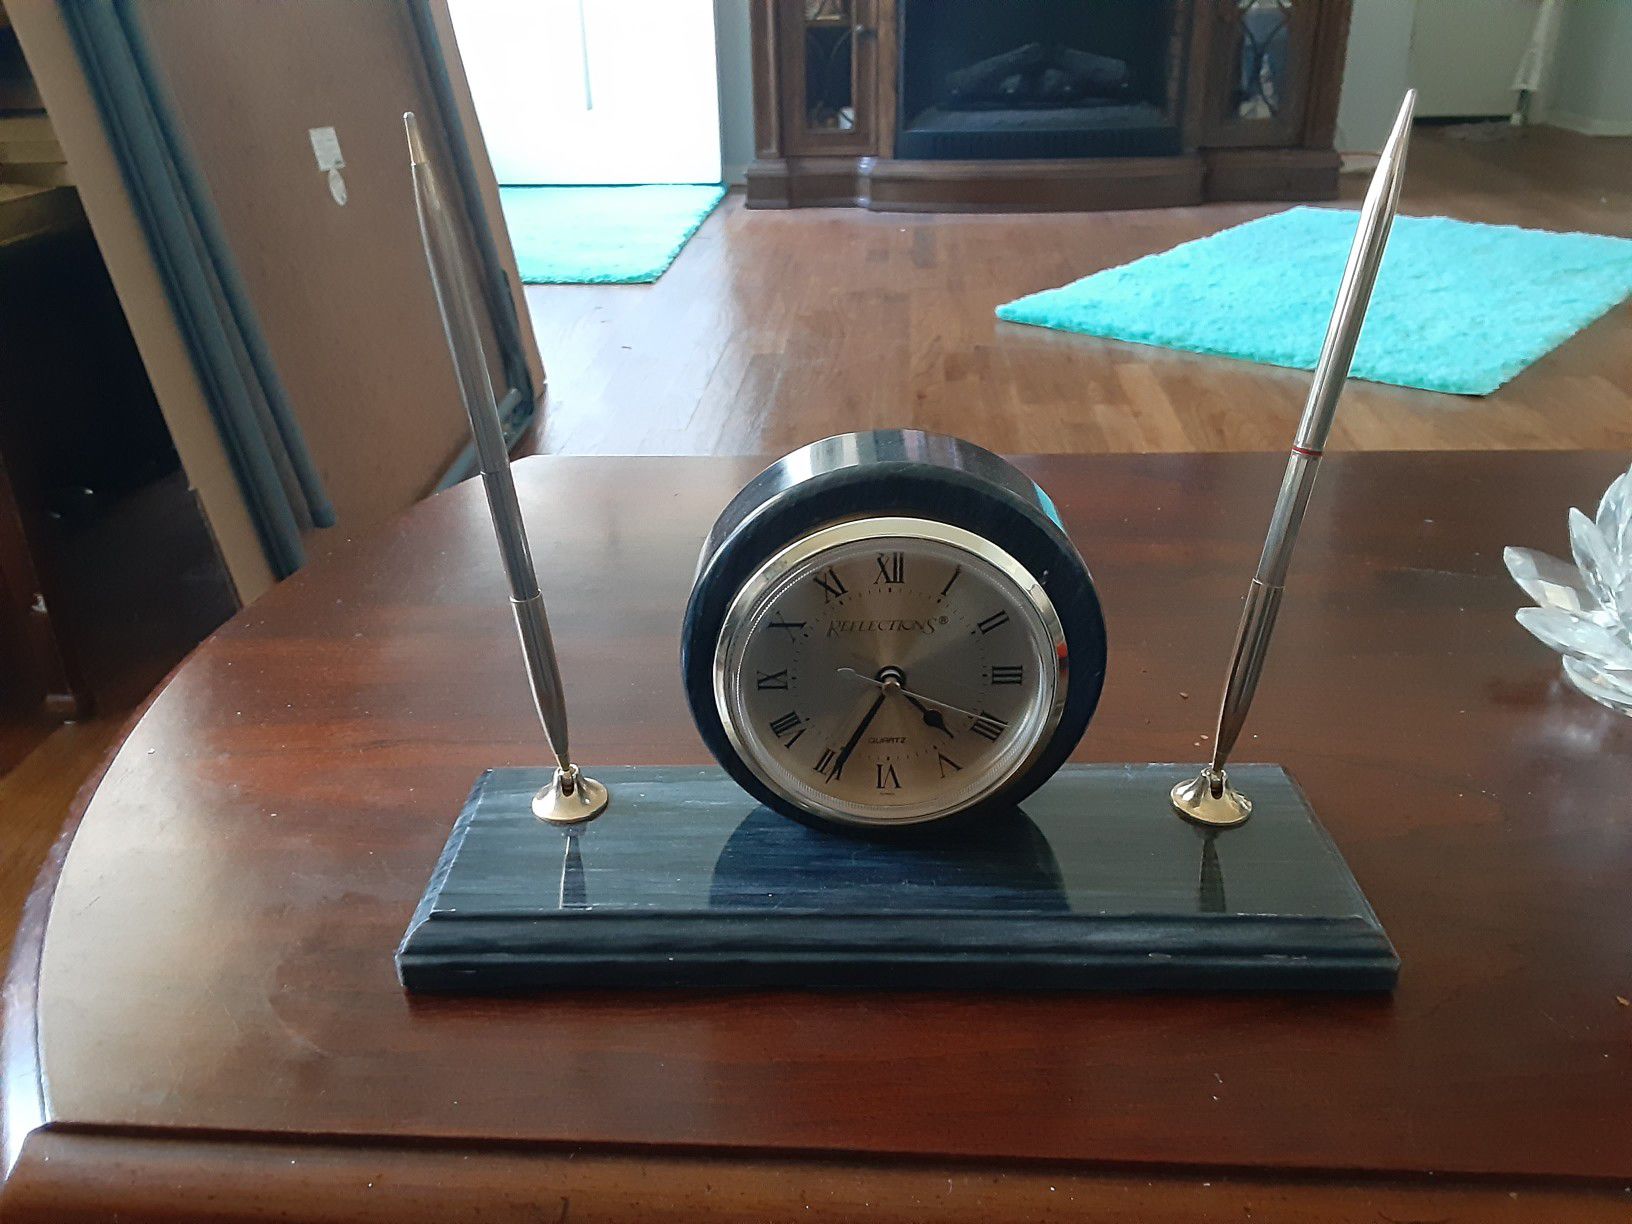 REALLY NEAT LOOKING Desk CLOCK All Marble